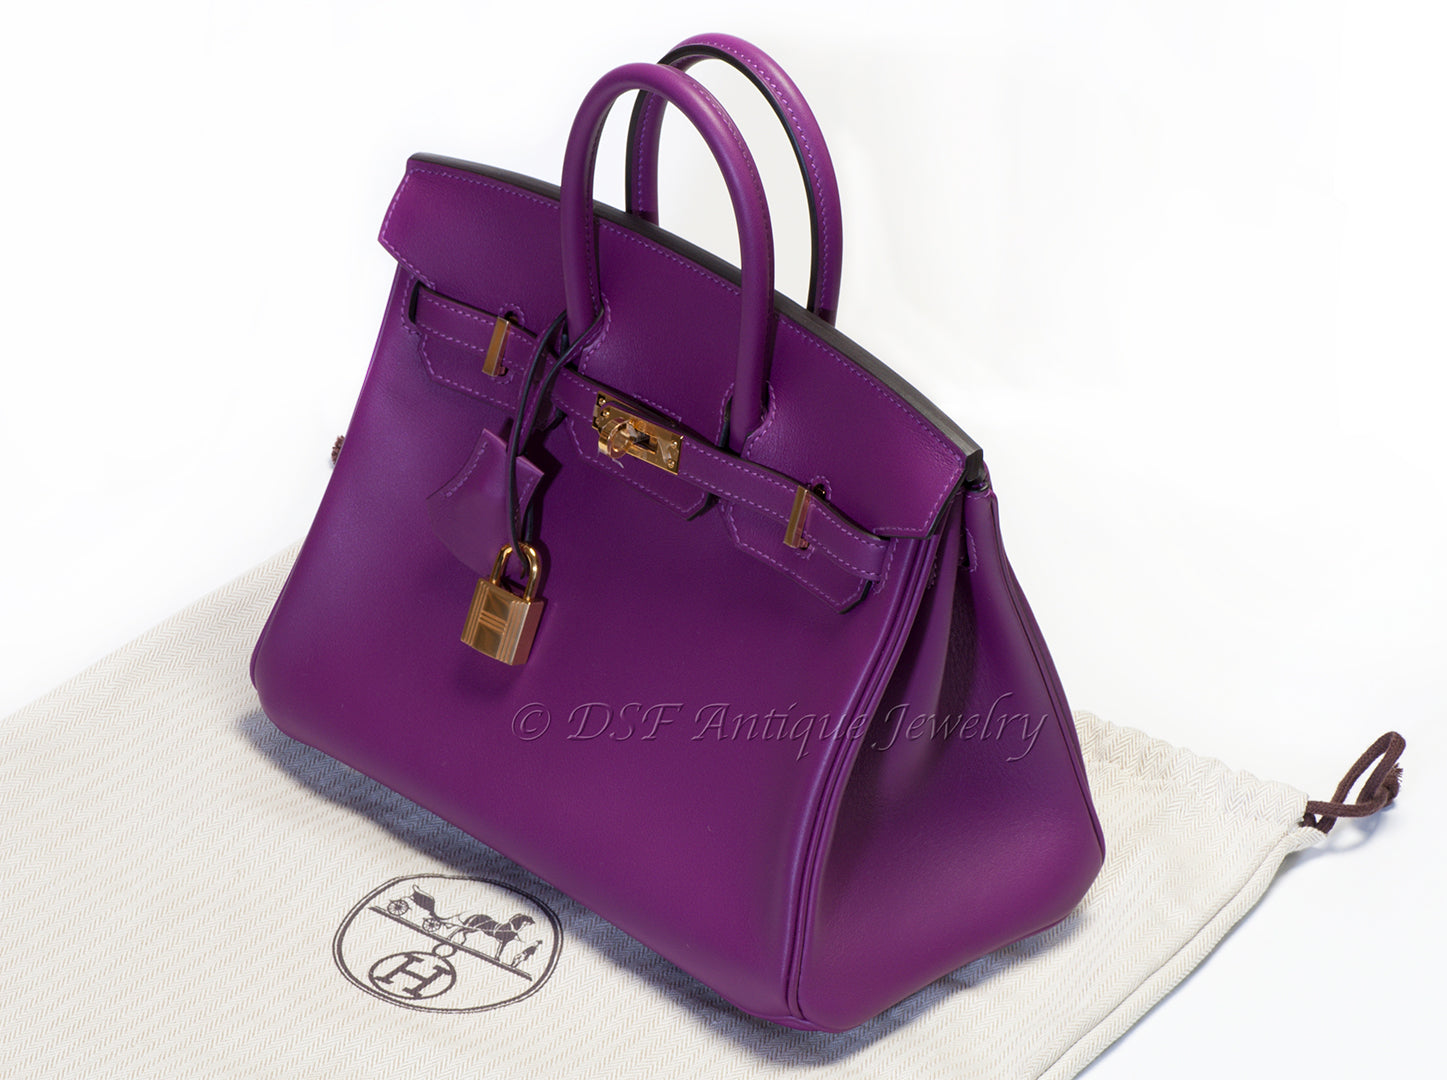 10 Facts About Buying an Hermes Birkin Bag